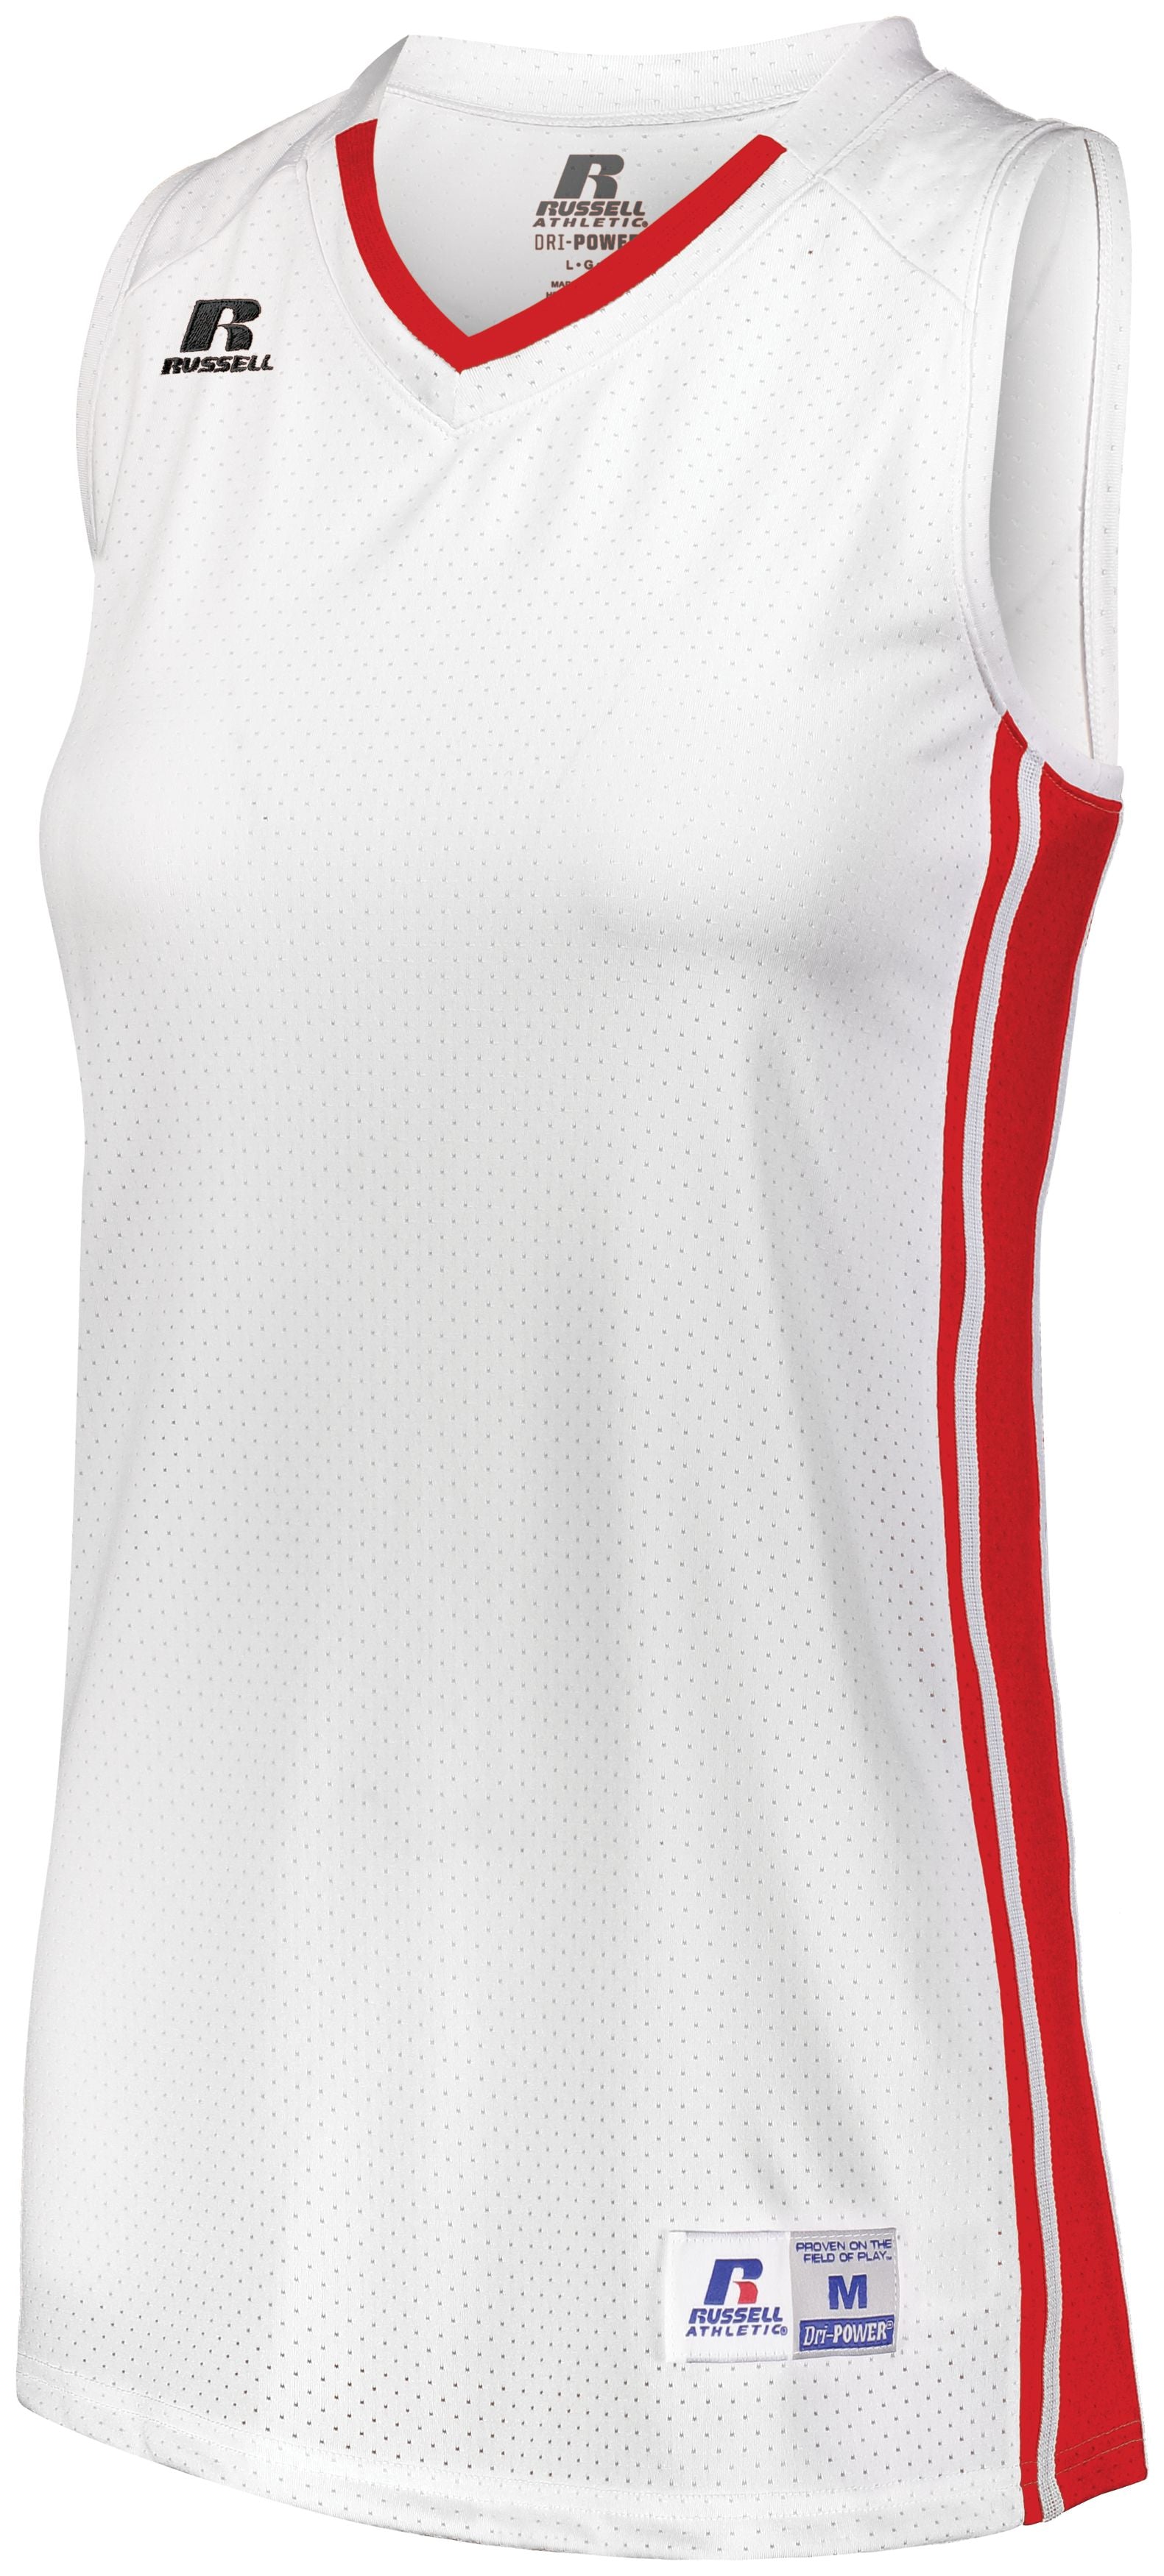 Russell Athletic Ladies Legacy Basketball Jersey in White/True Red  -Part of the Ladies, Ladies-Jersey, Basketball, Russell-Athletic-Products, Shirts, All-Sports, All-Sports-1 product lines at KanaleyCreations.com